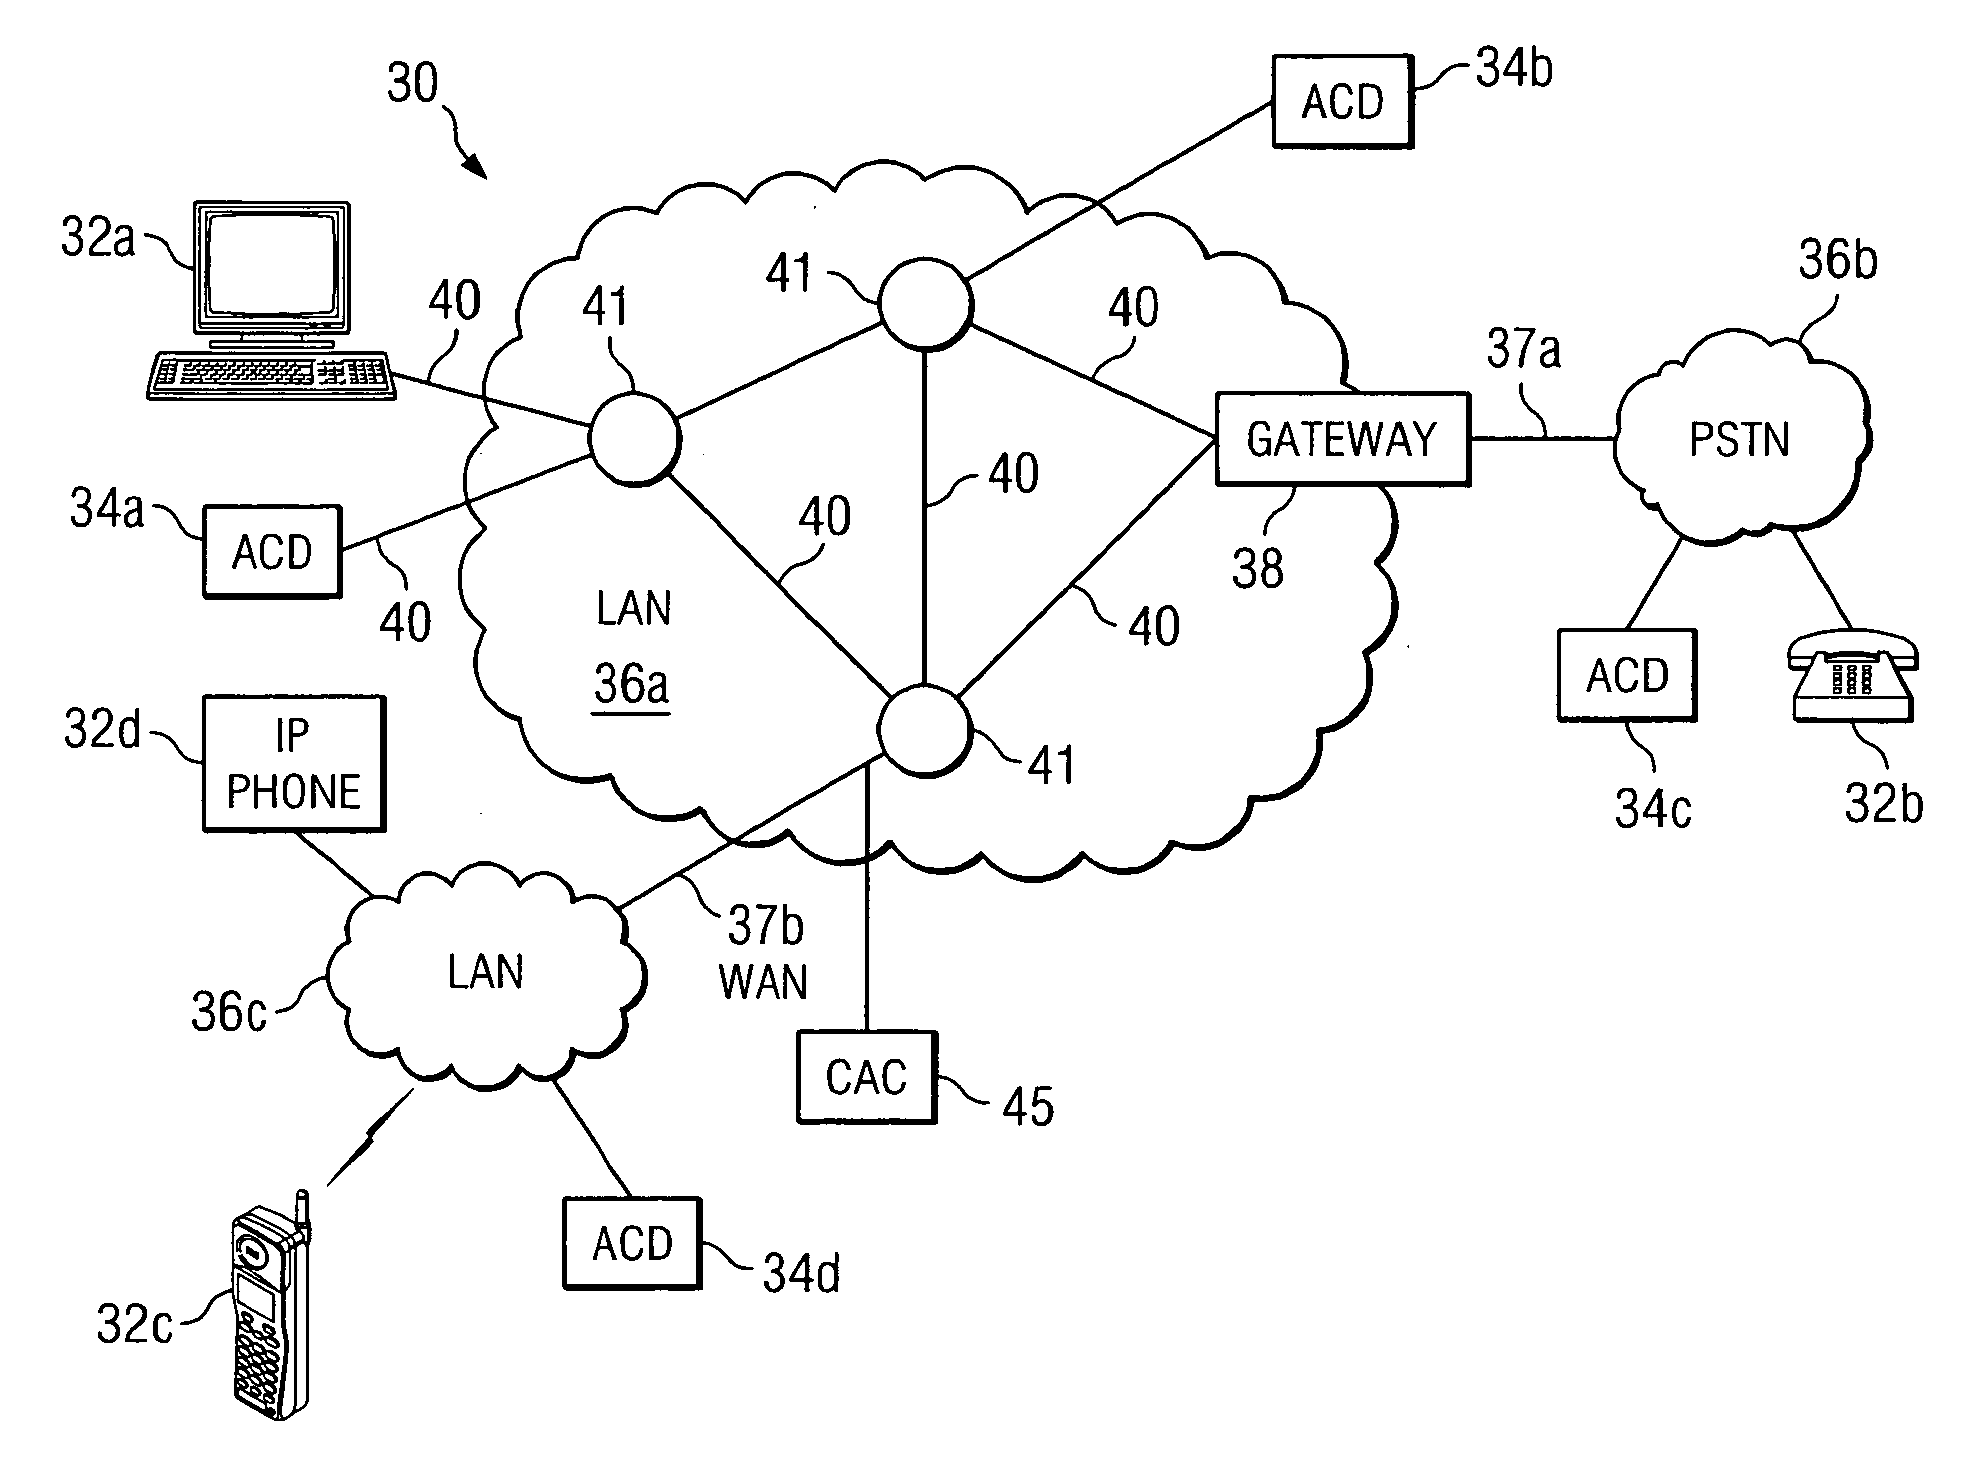 Method and system for handling calls at an automatic call distribution system